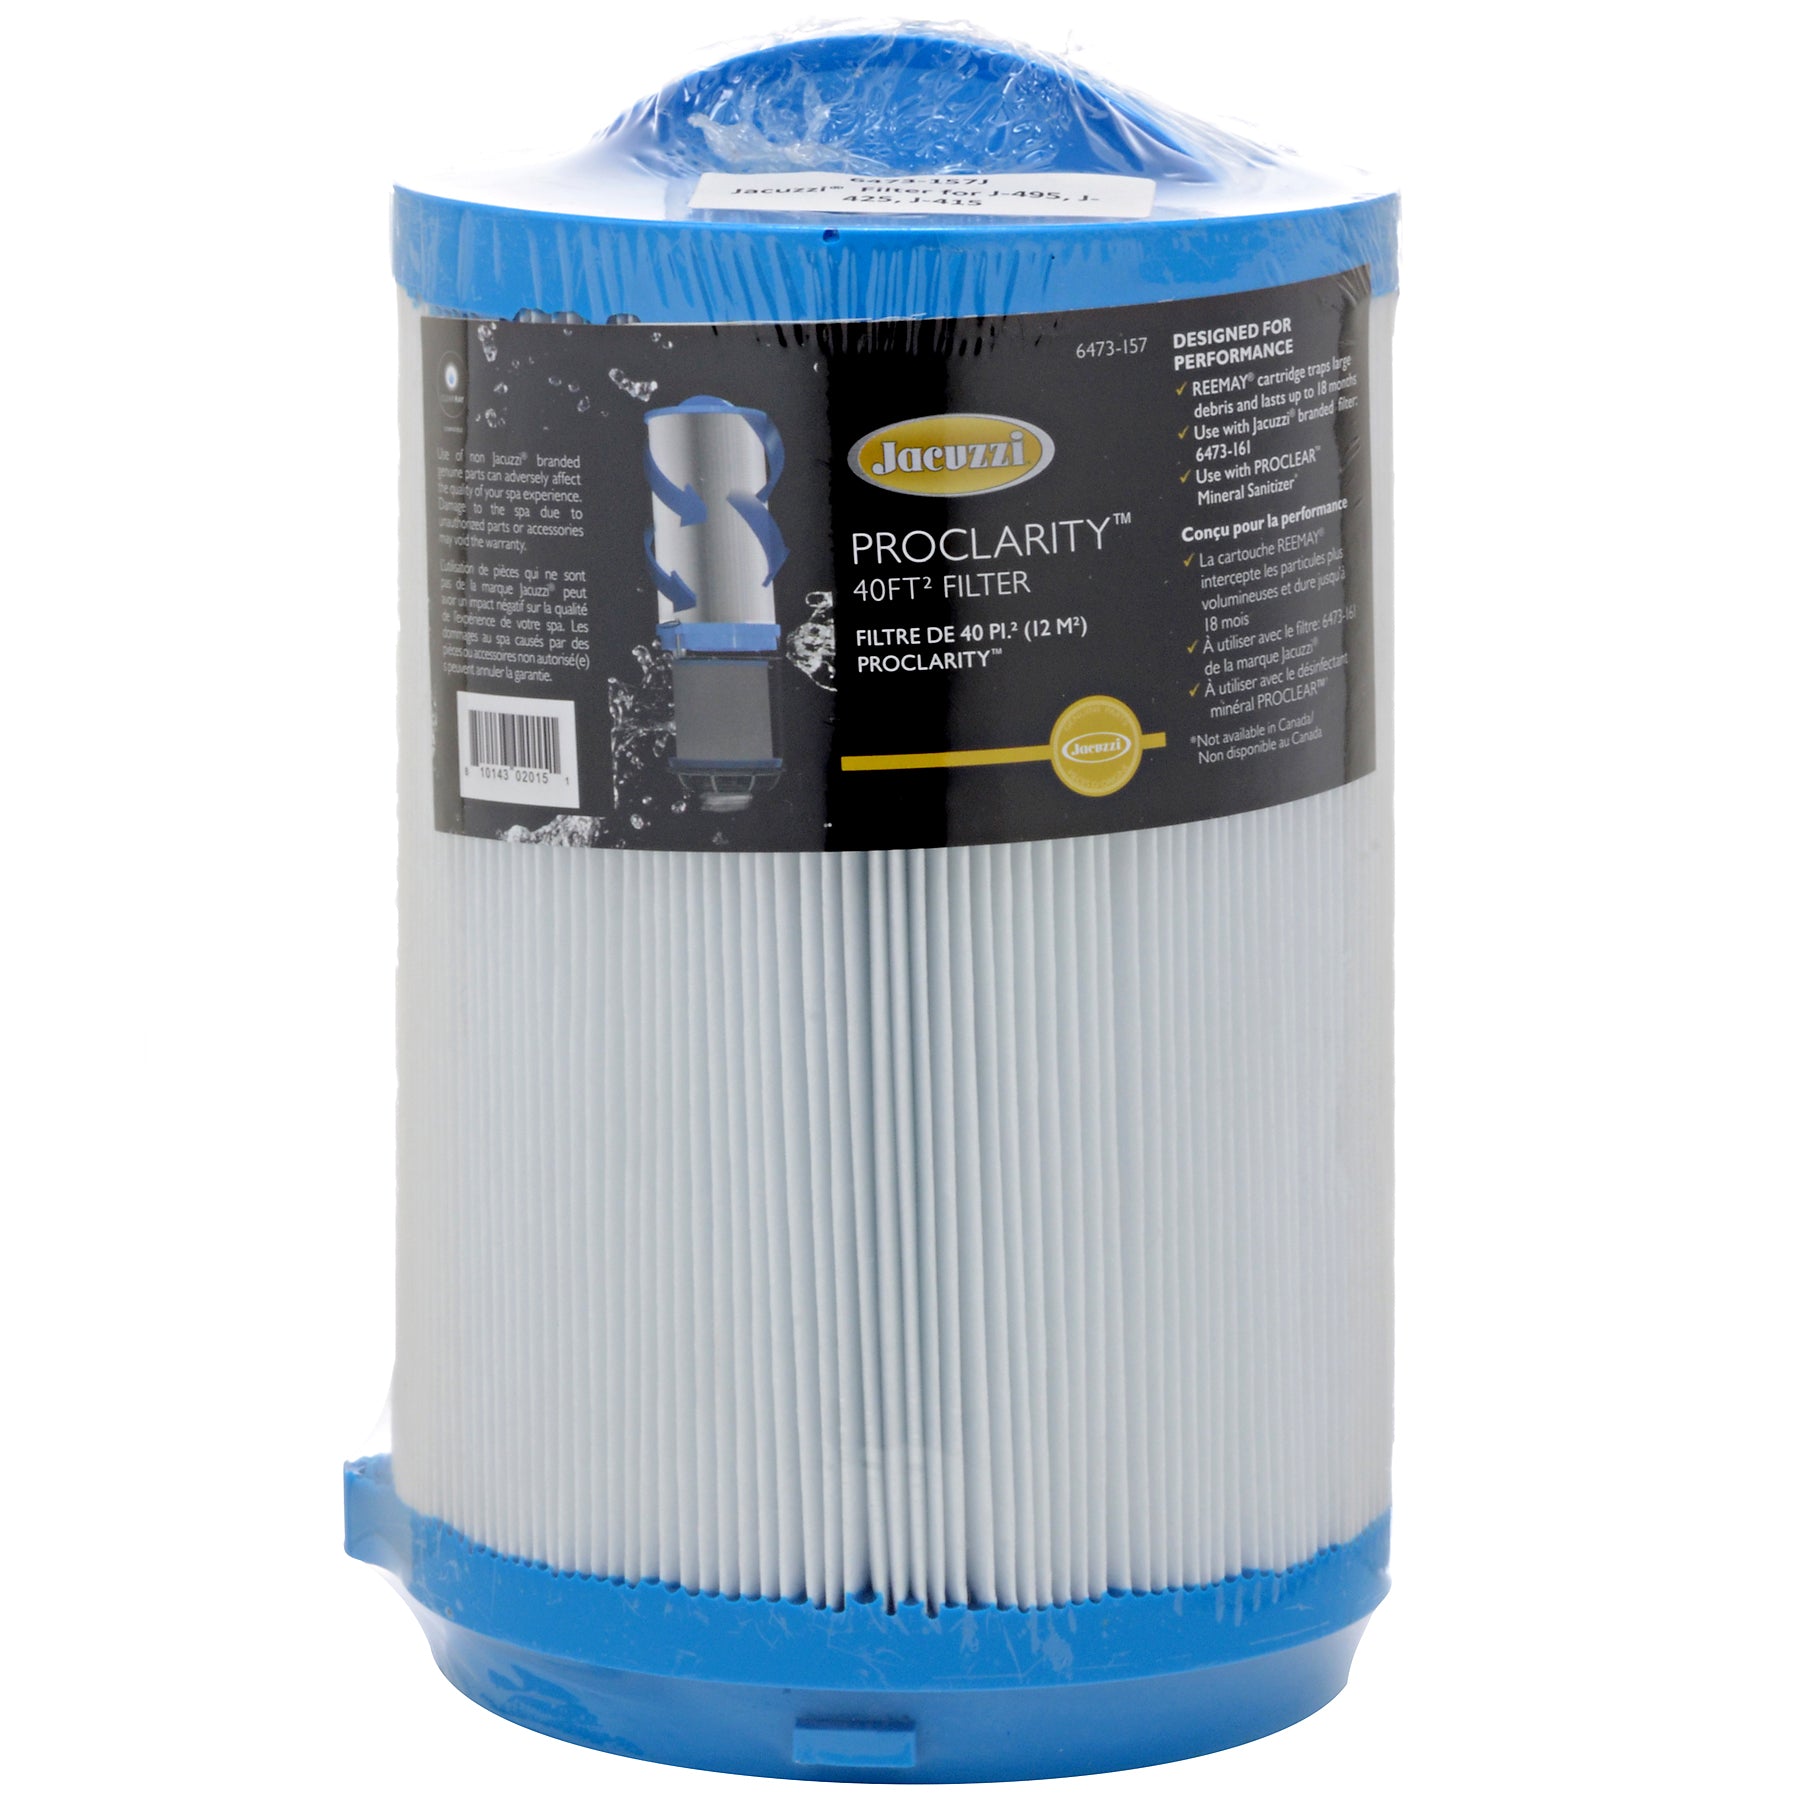 Jacuzzi® PROCLARITY® 40 sq. ft. Primary Filter, 6473-157J